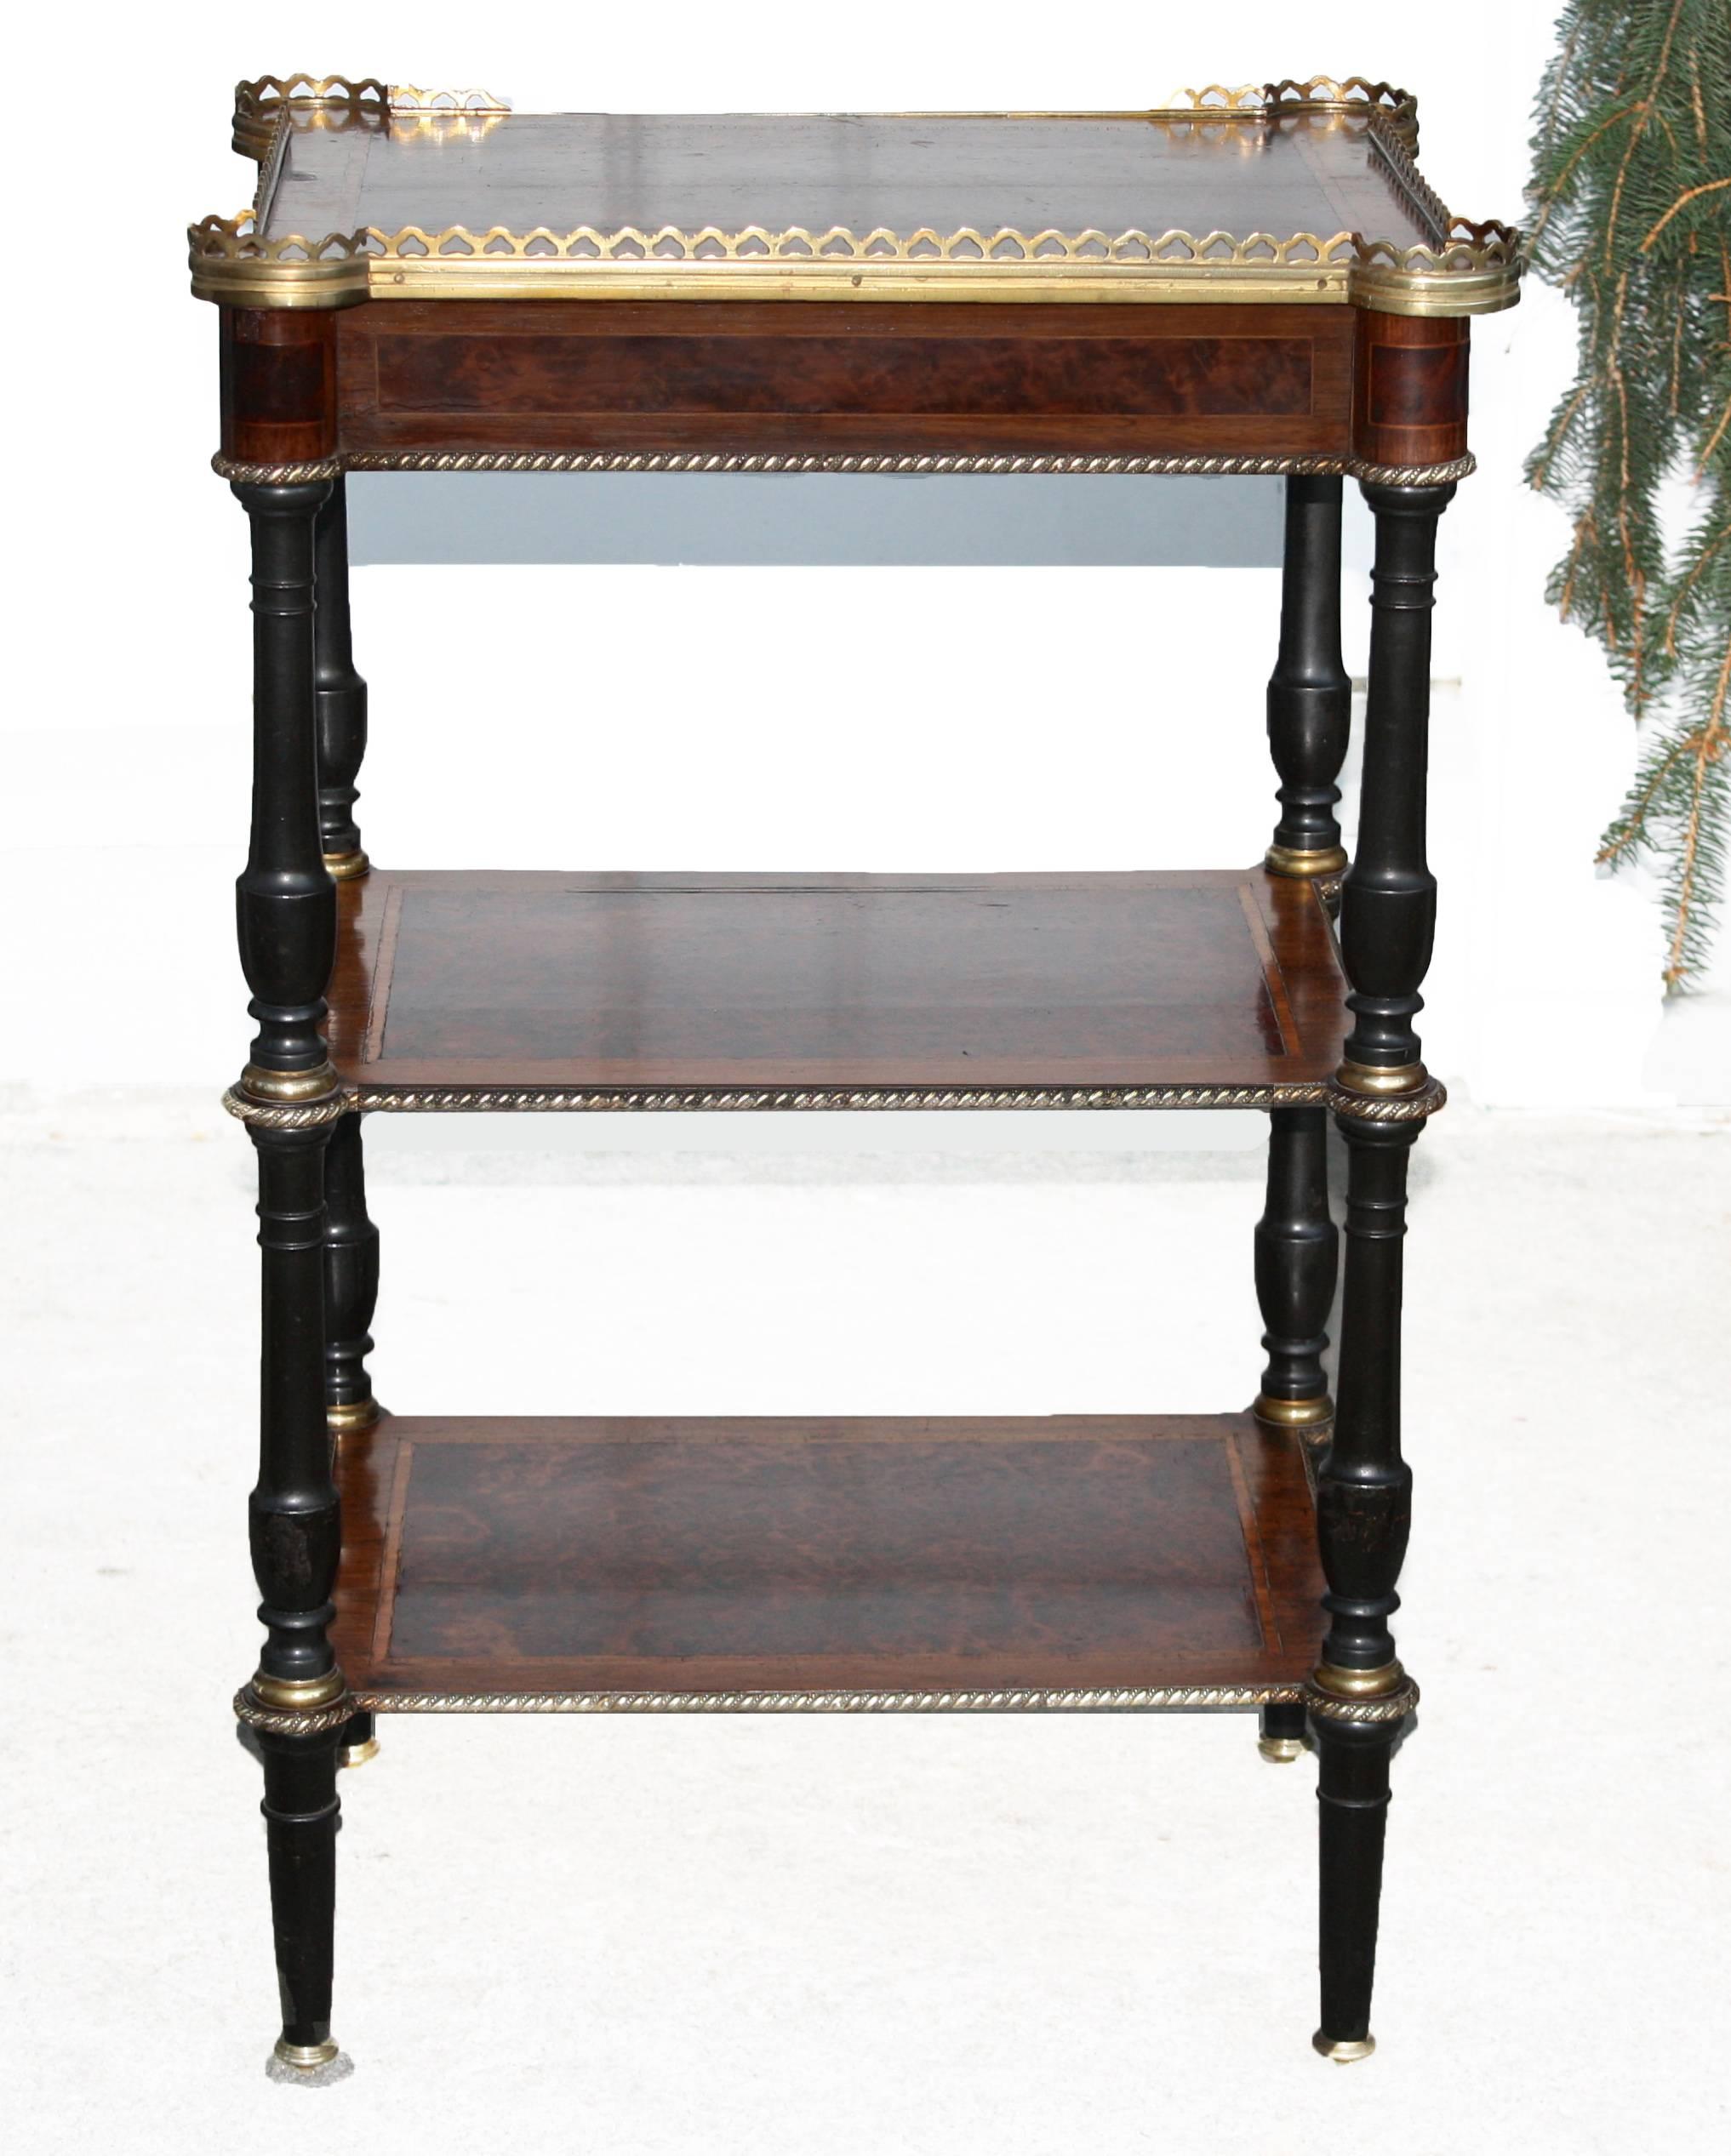 Forged P. Sormani French Neoclassical Revival Three-Tier Side Table For Sale